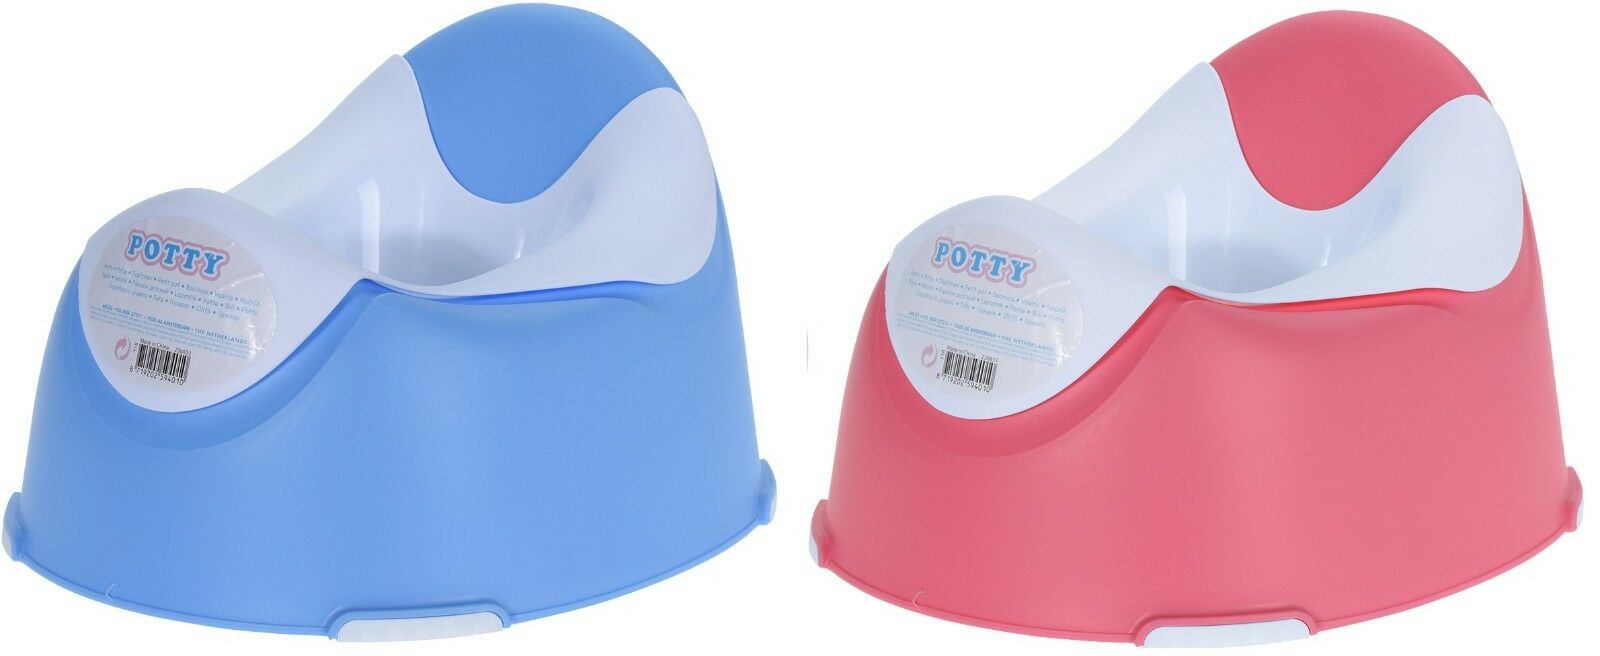 Baby Potty Baby Training Potties For Boys & Girls Blue & Pink Removeable Insert